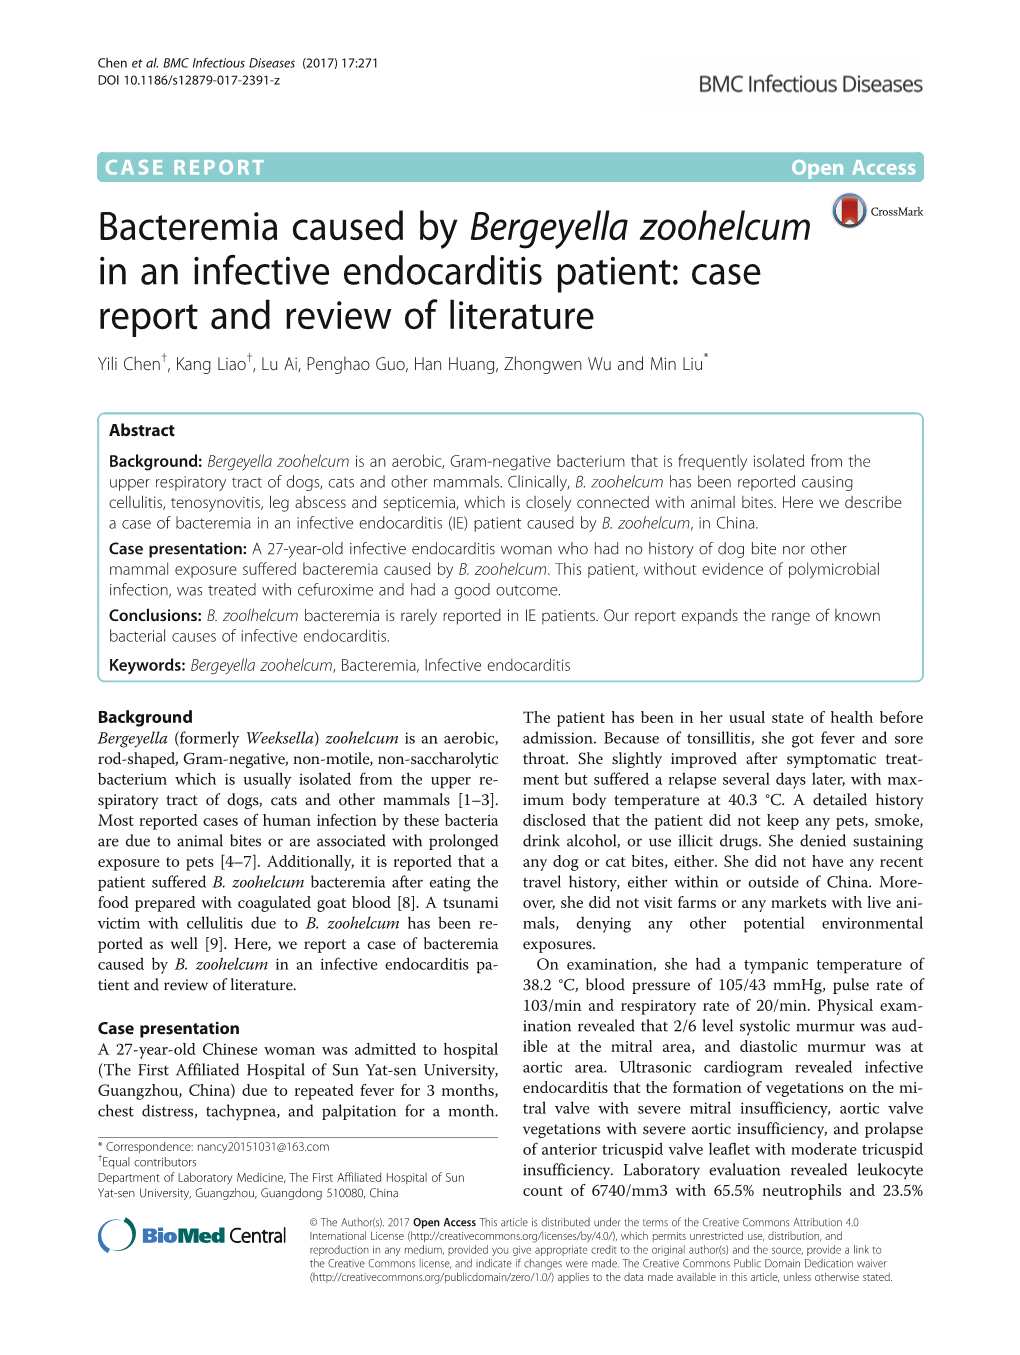 Bacteremia Caused by Bergeyella Zoohelcum in an Infective